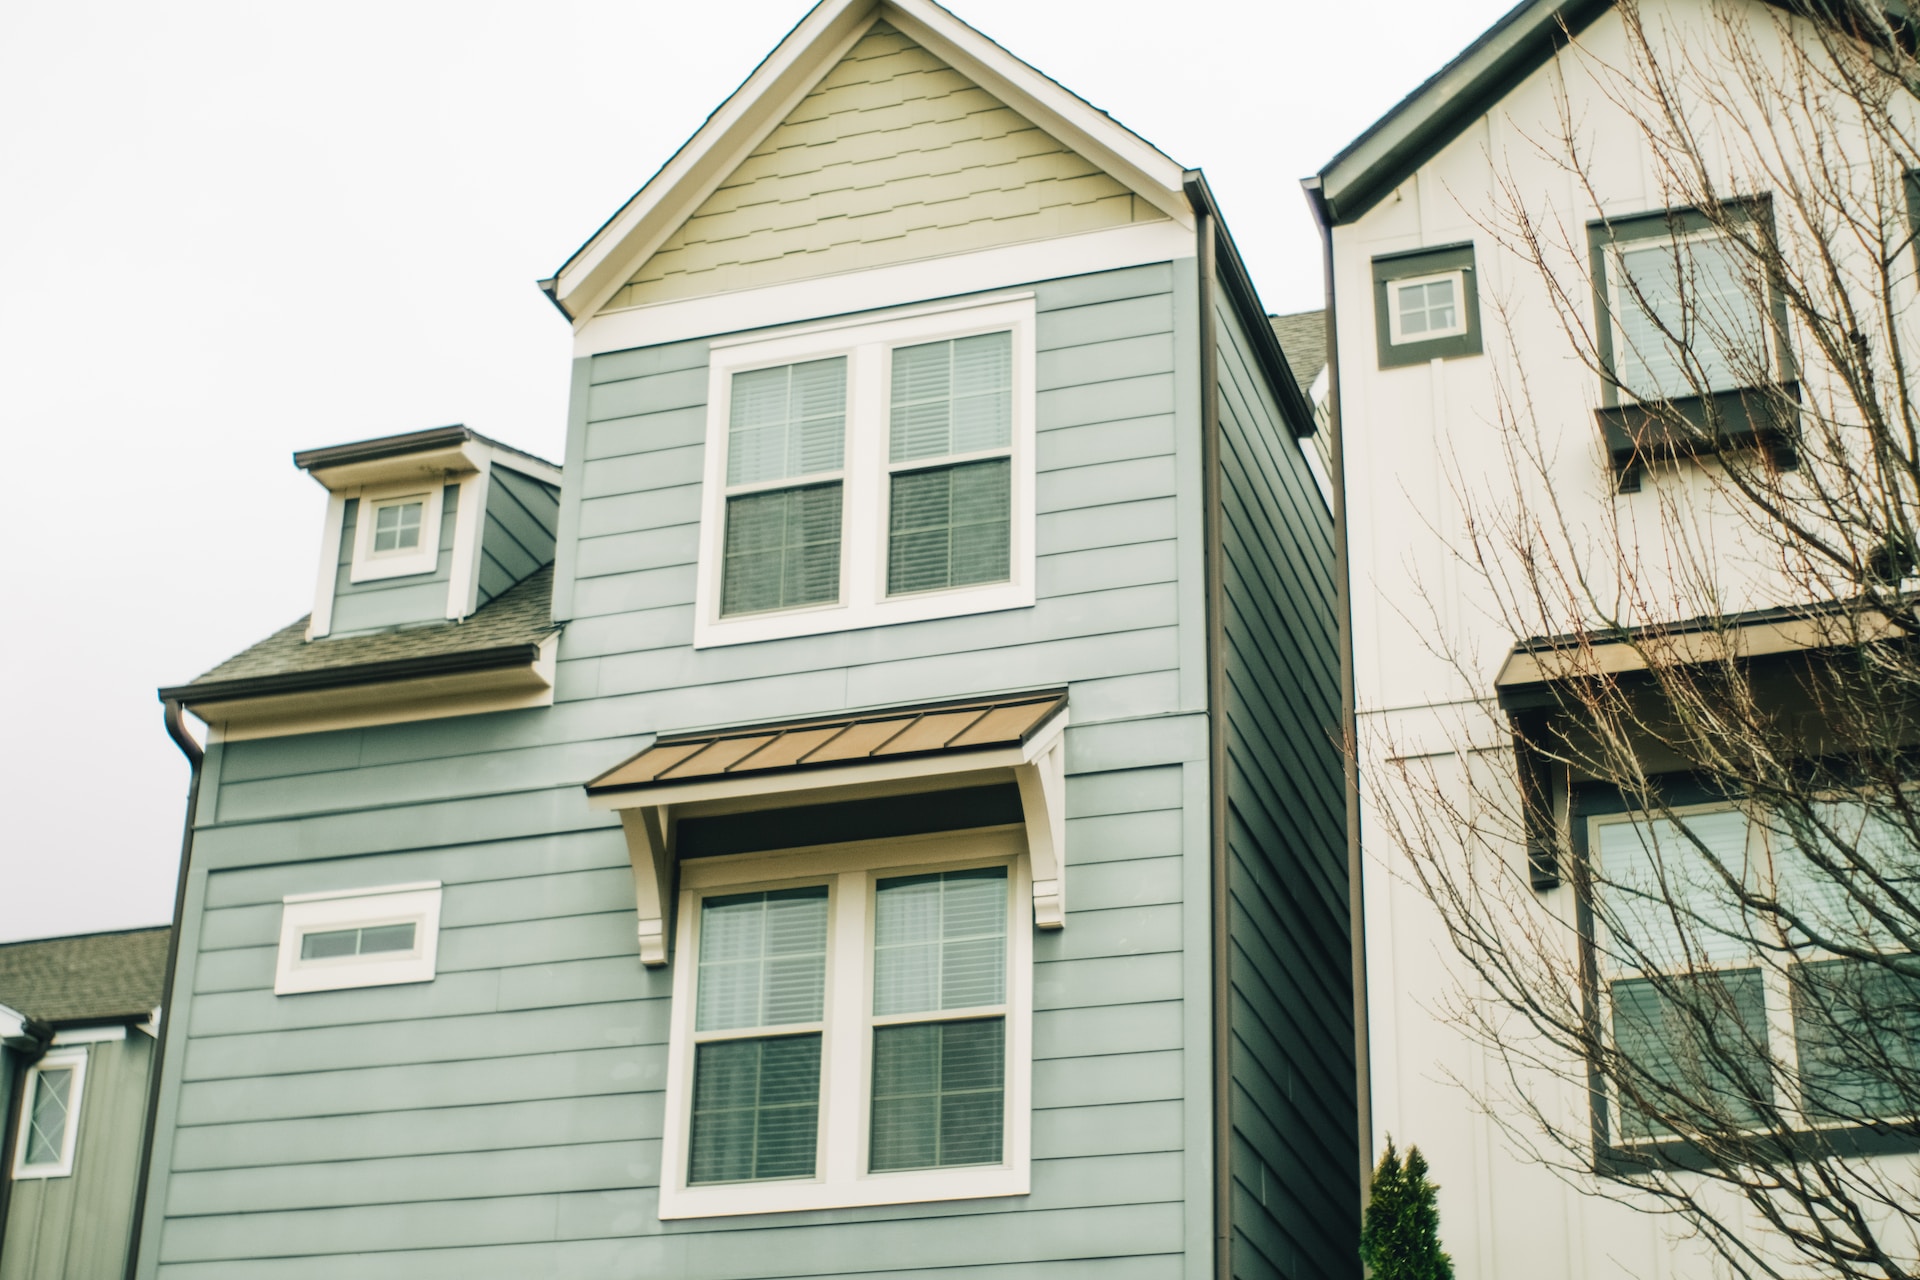 Siding Options for Your Home